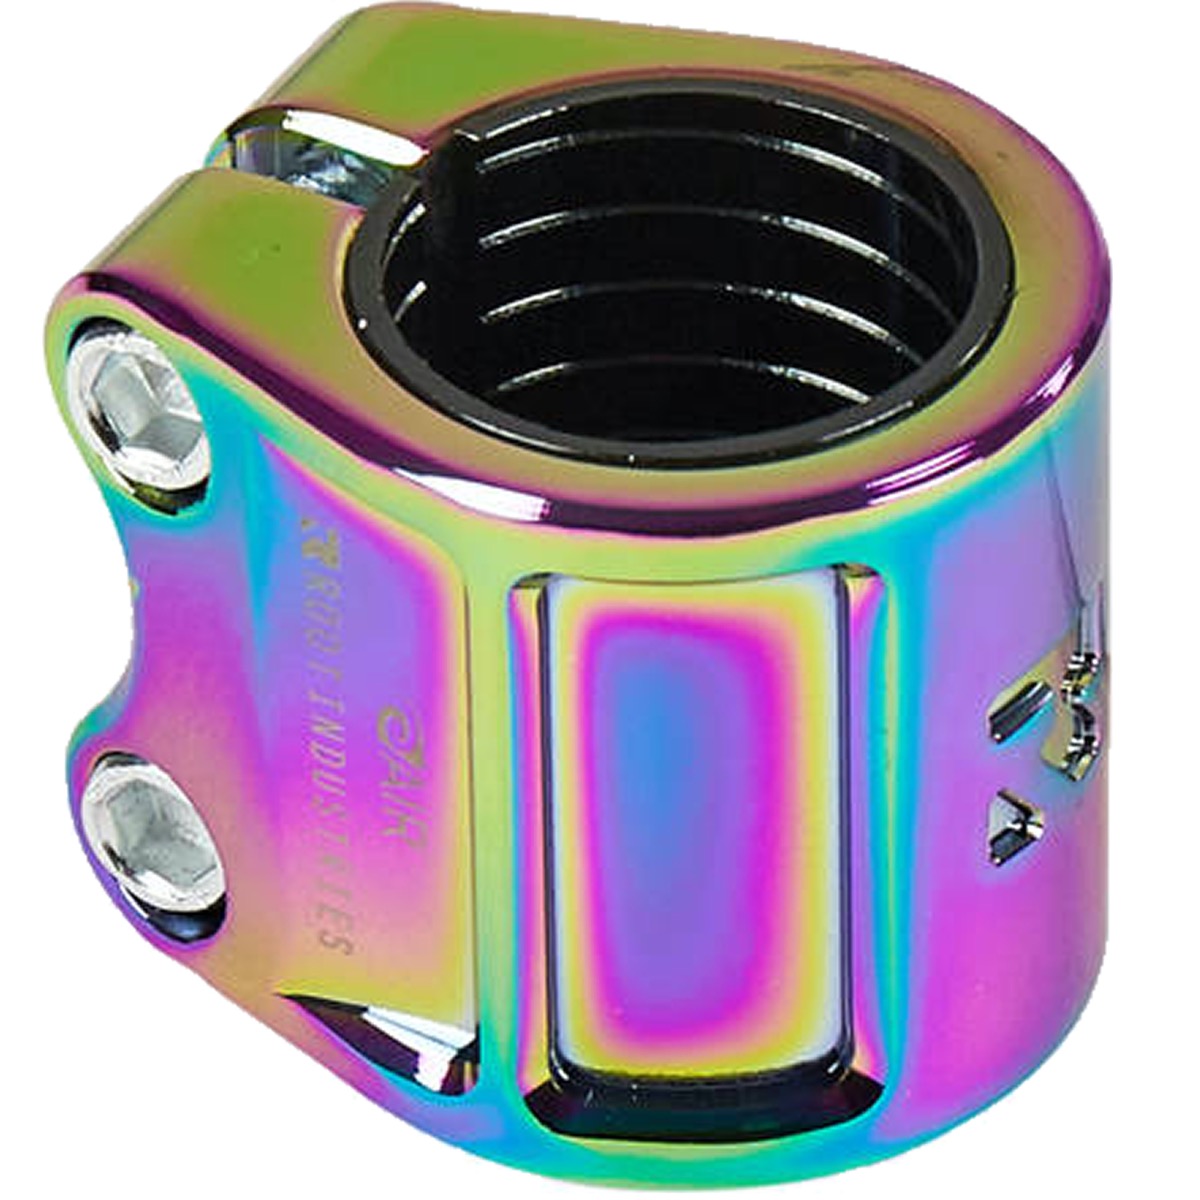 An image of Root Industries Neochrome Rocket Fuel Air Double Clamp